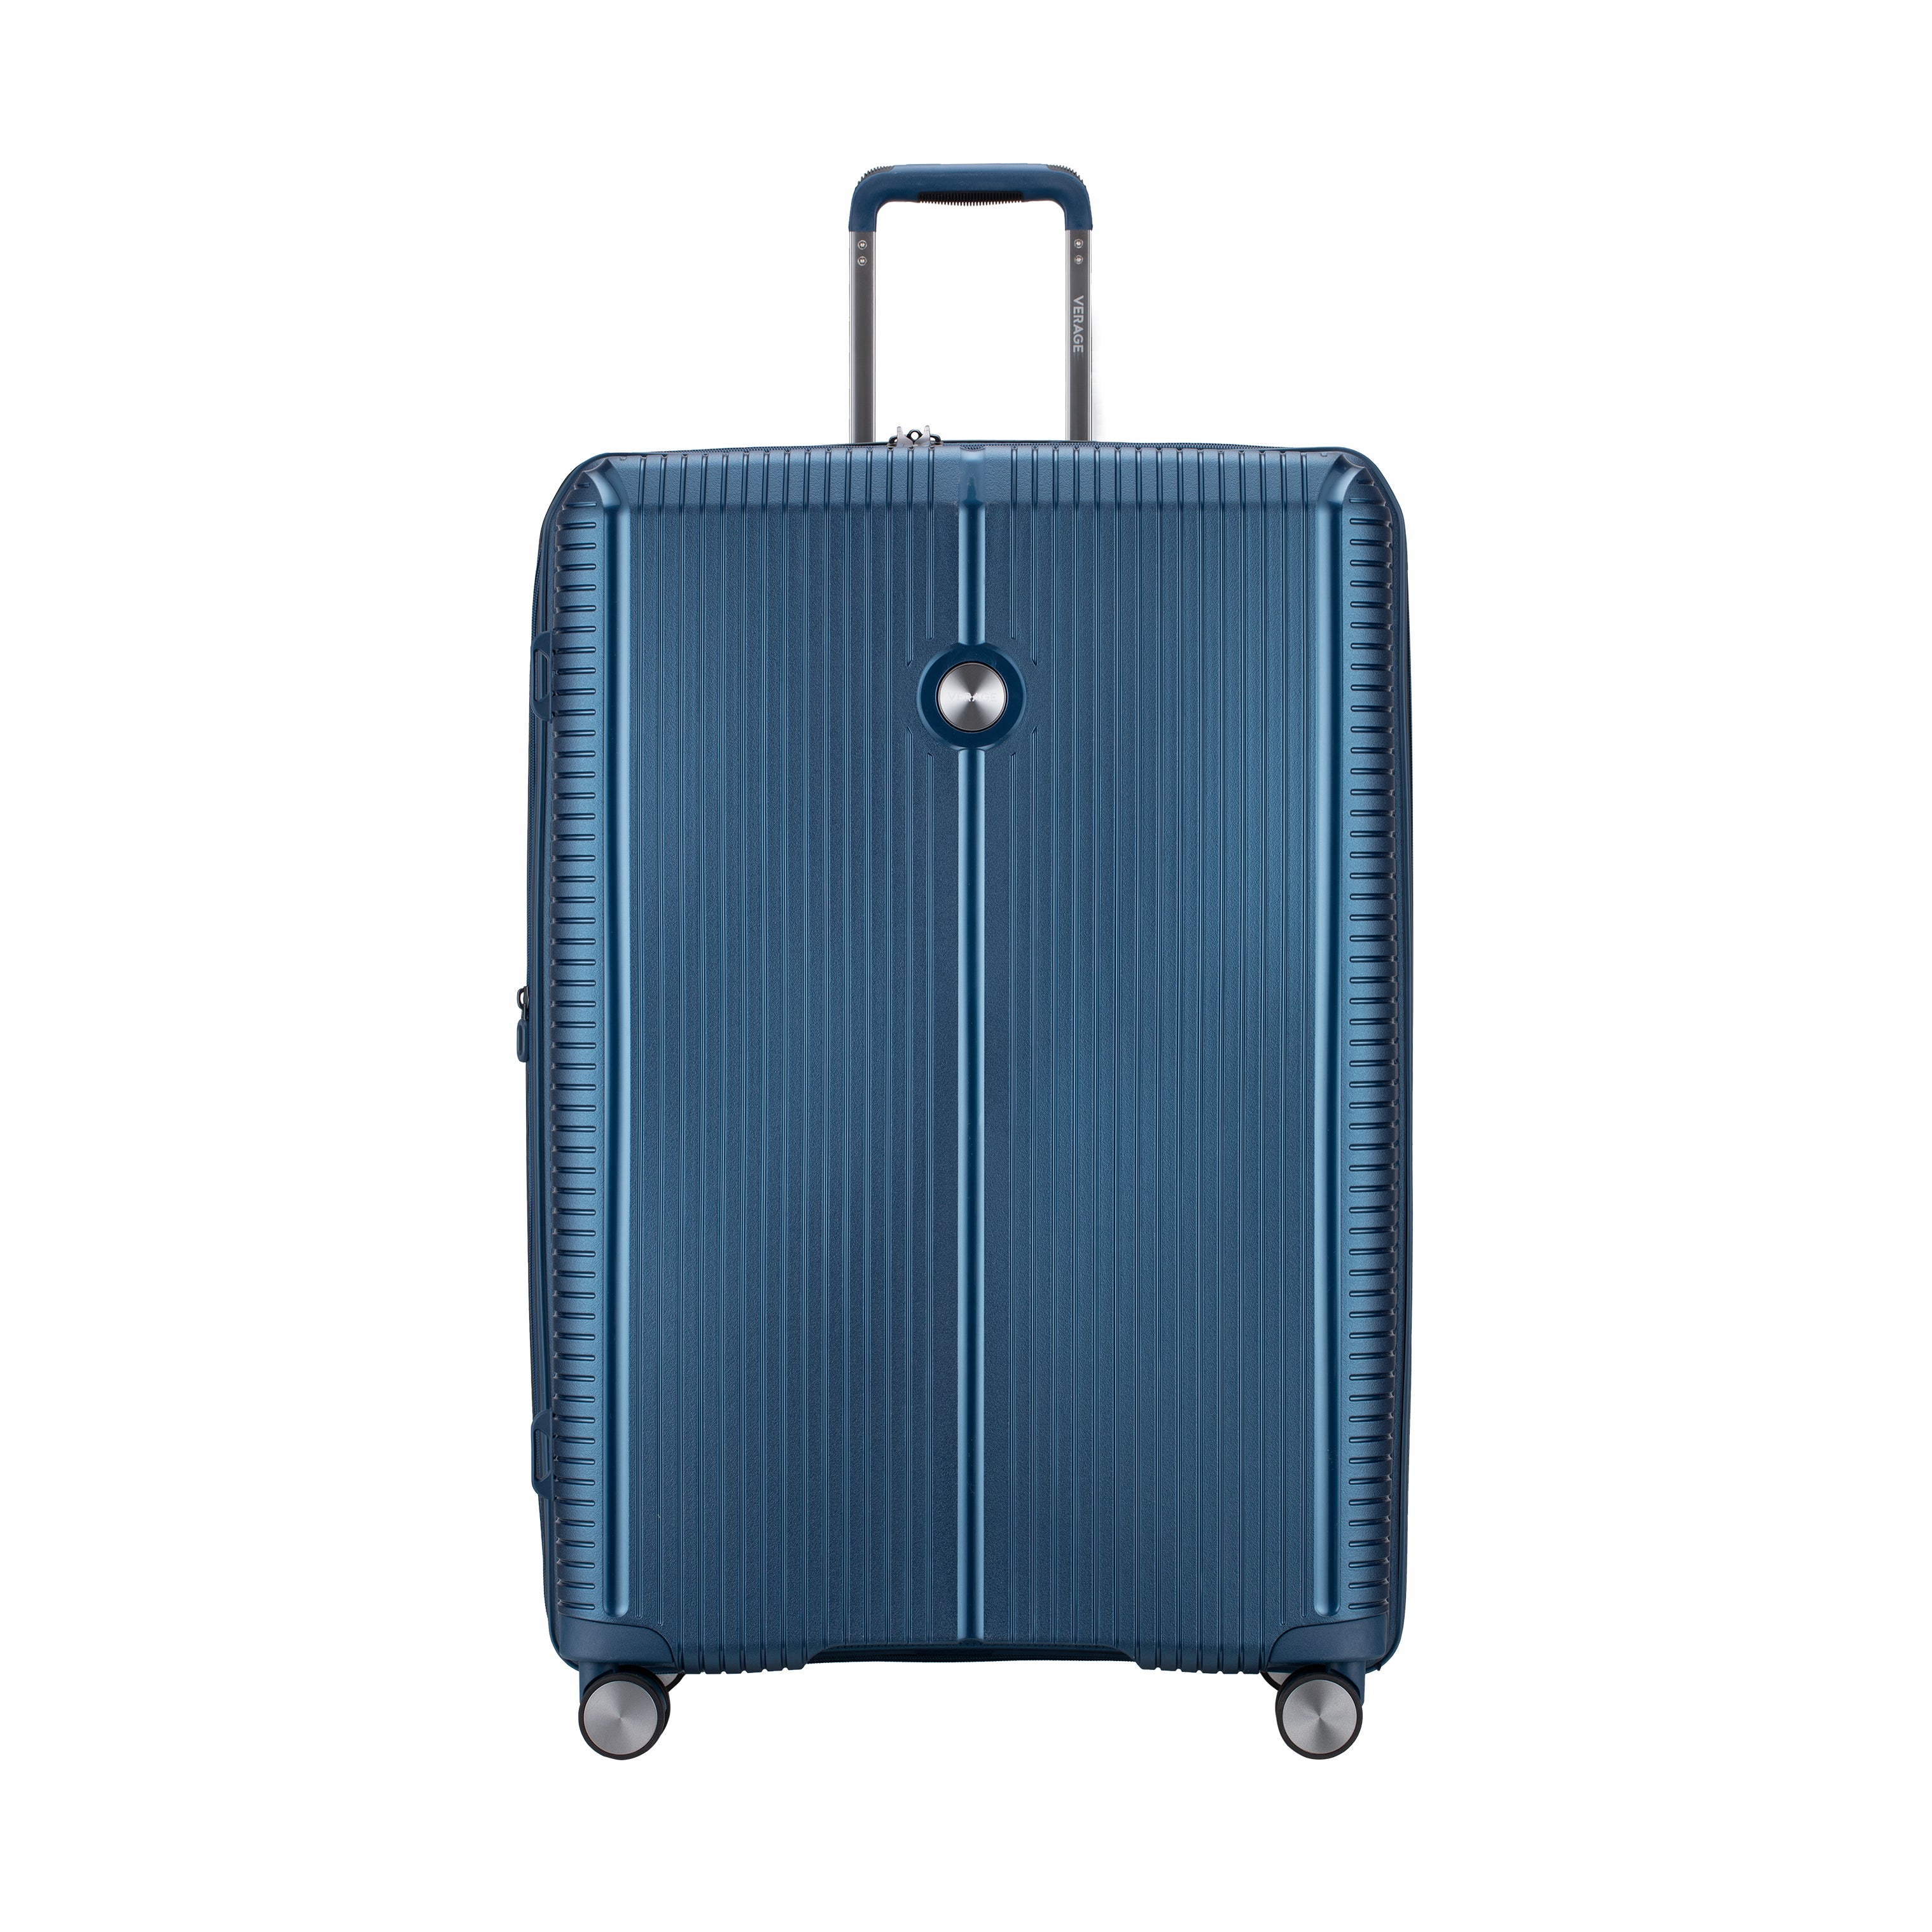 Rome (Large Check-In Suitcase)